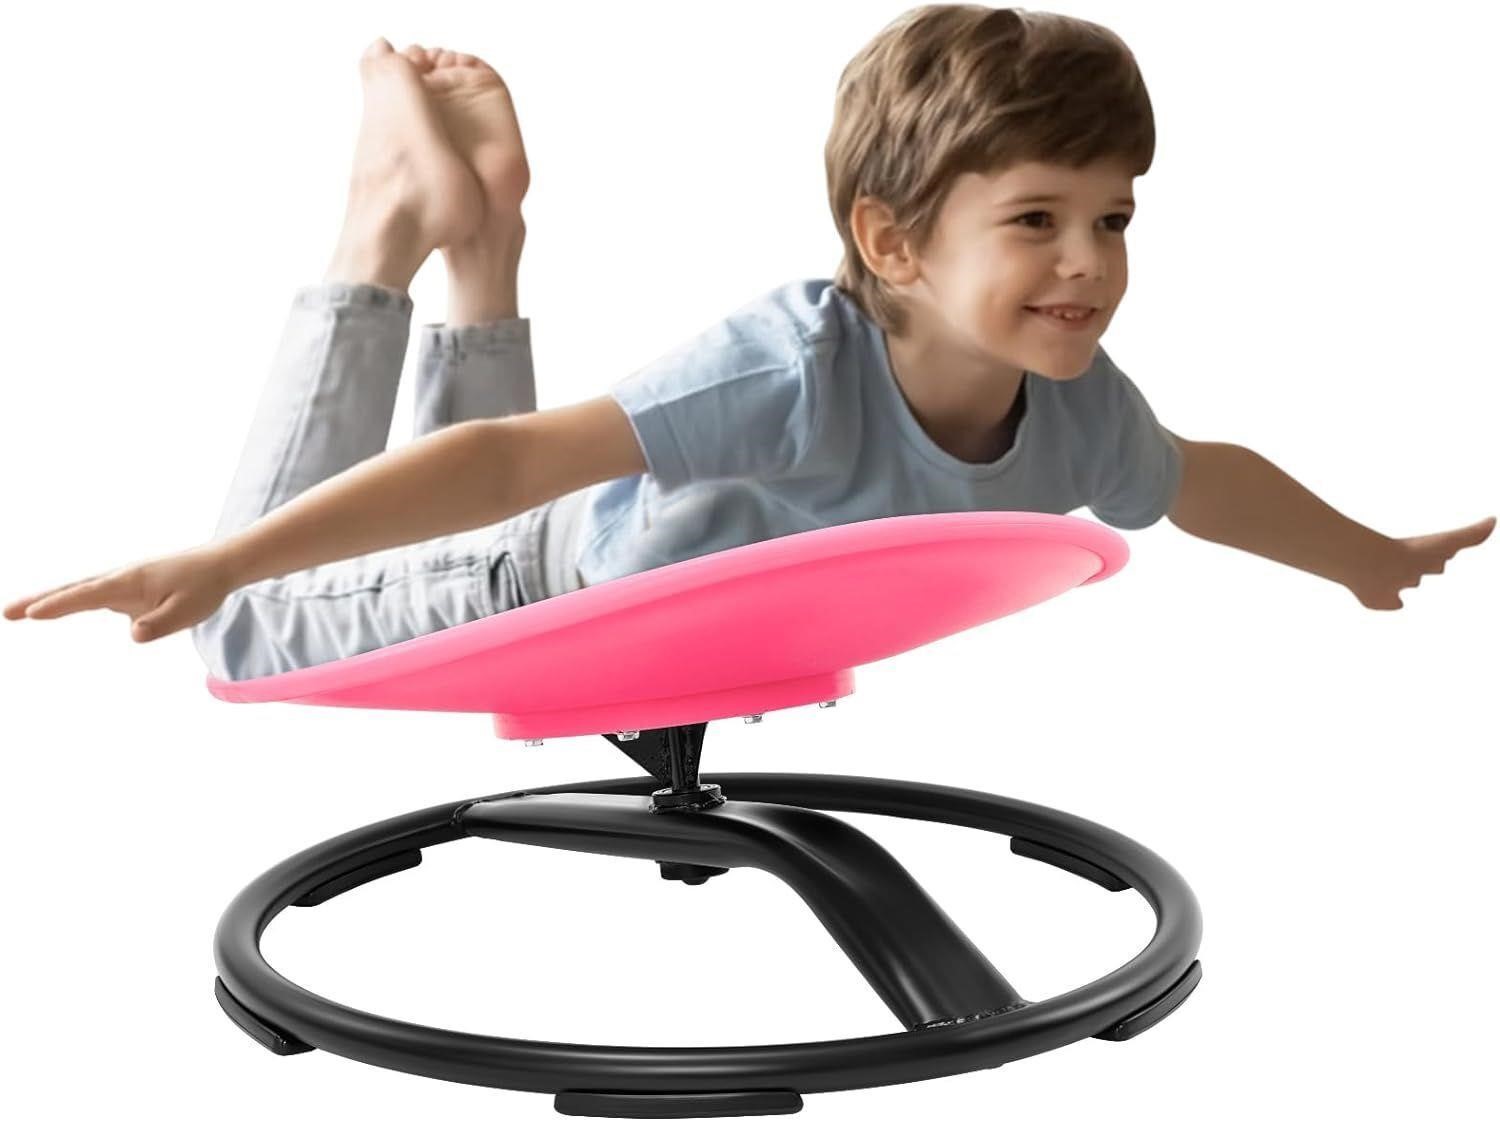 Zhenx Spinning Chair for Kids, Sensory Toy Chair,